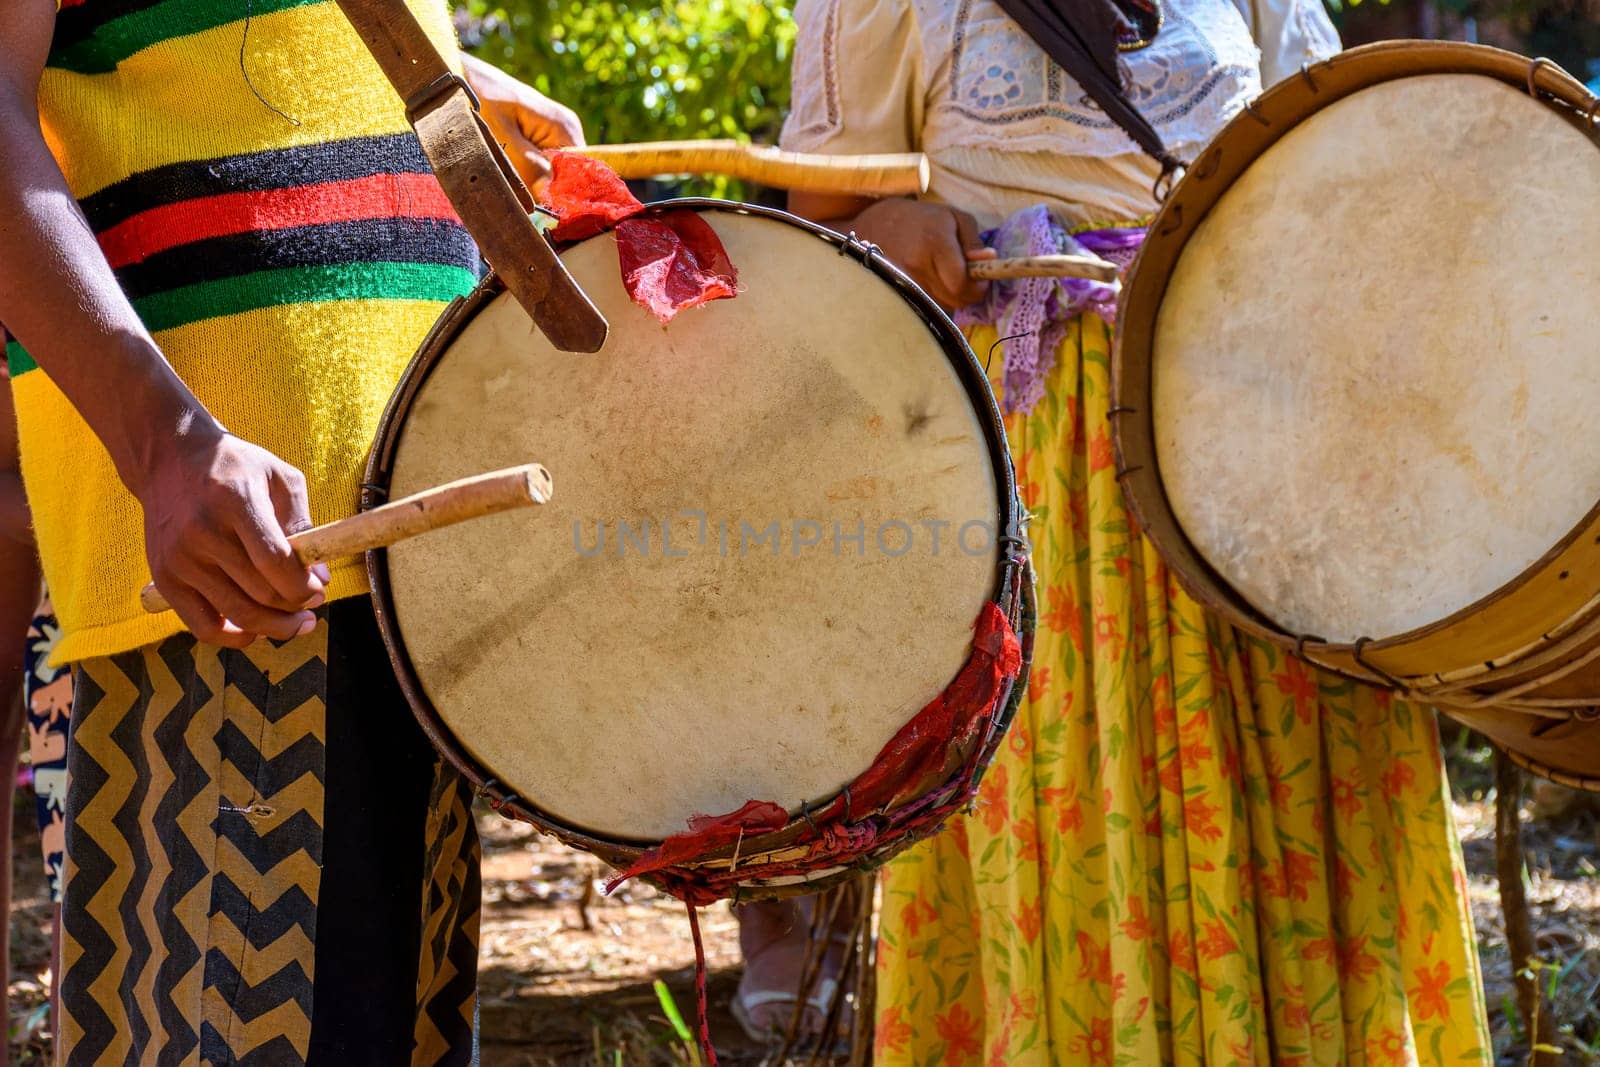 Ethnic and rudimentary drums in a religious festival that originated in the mixing of the culture of enslaved Africans with European colonizers